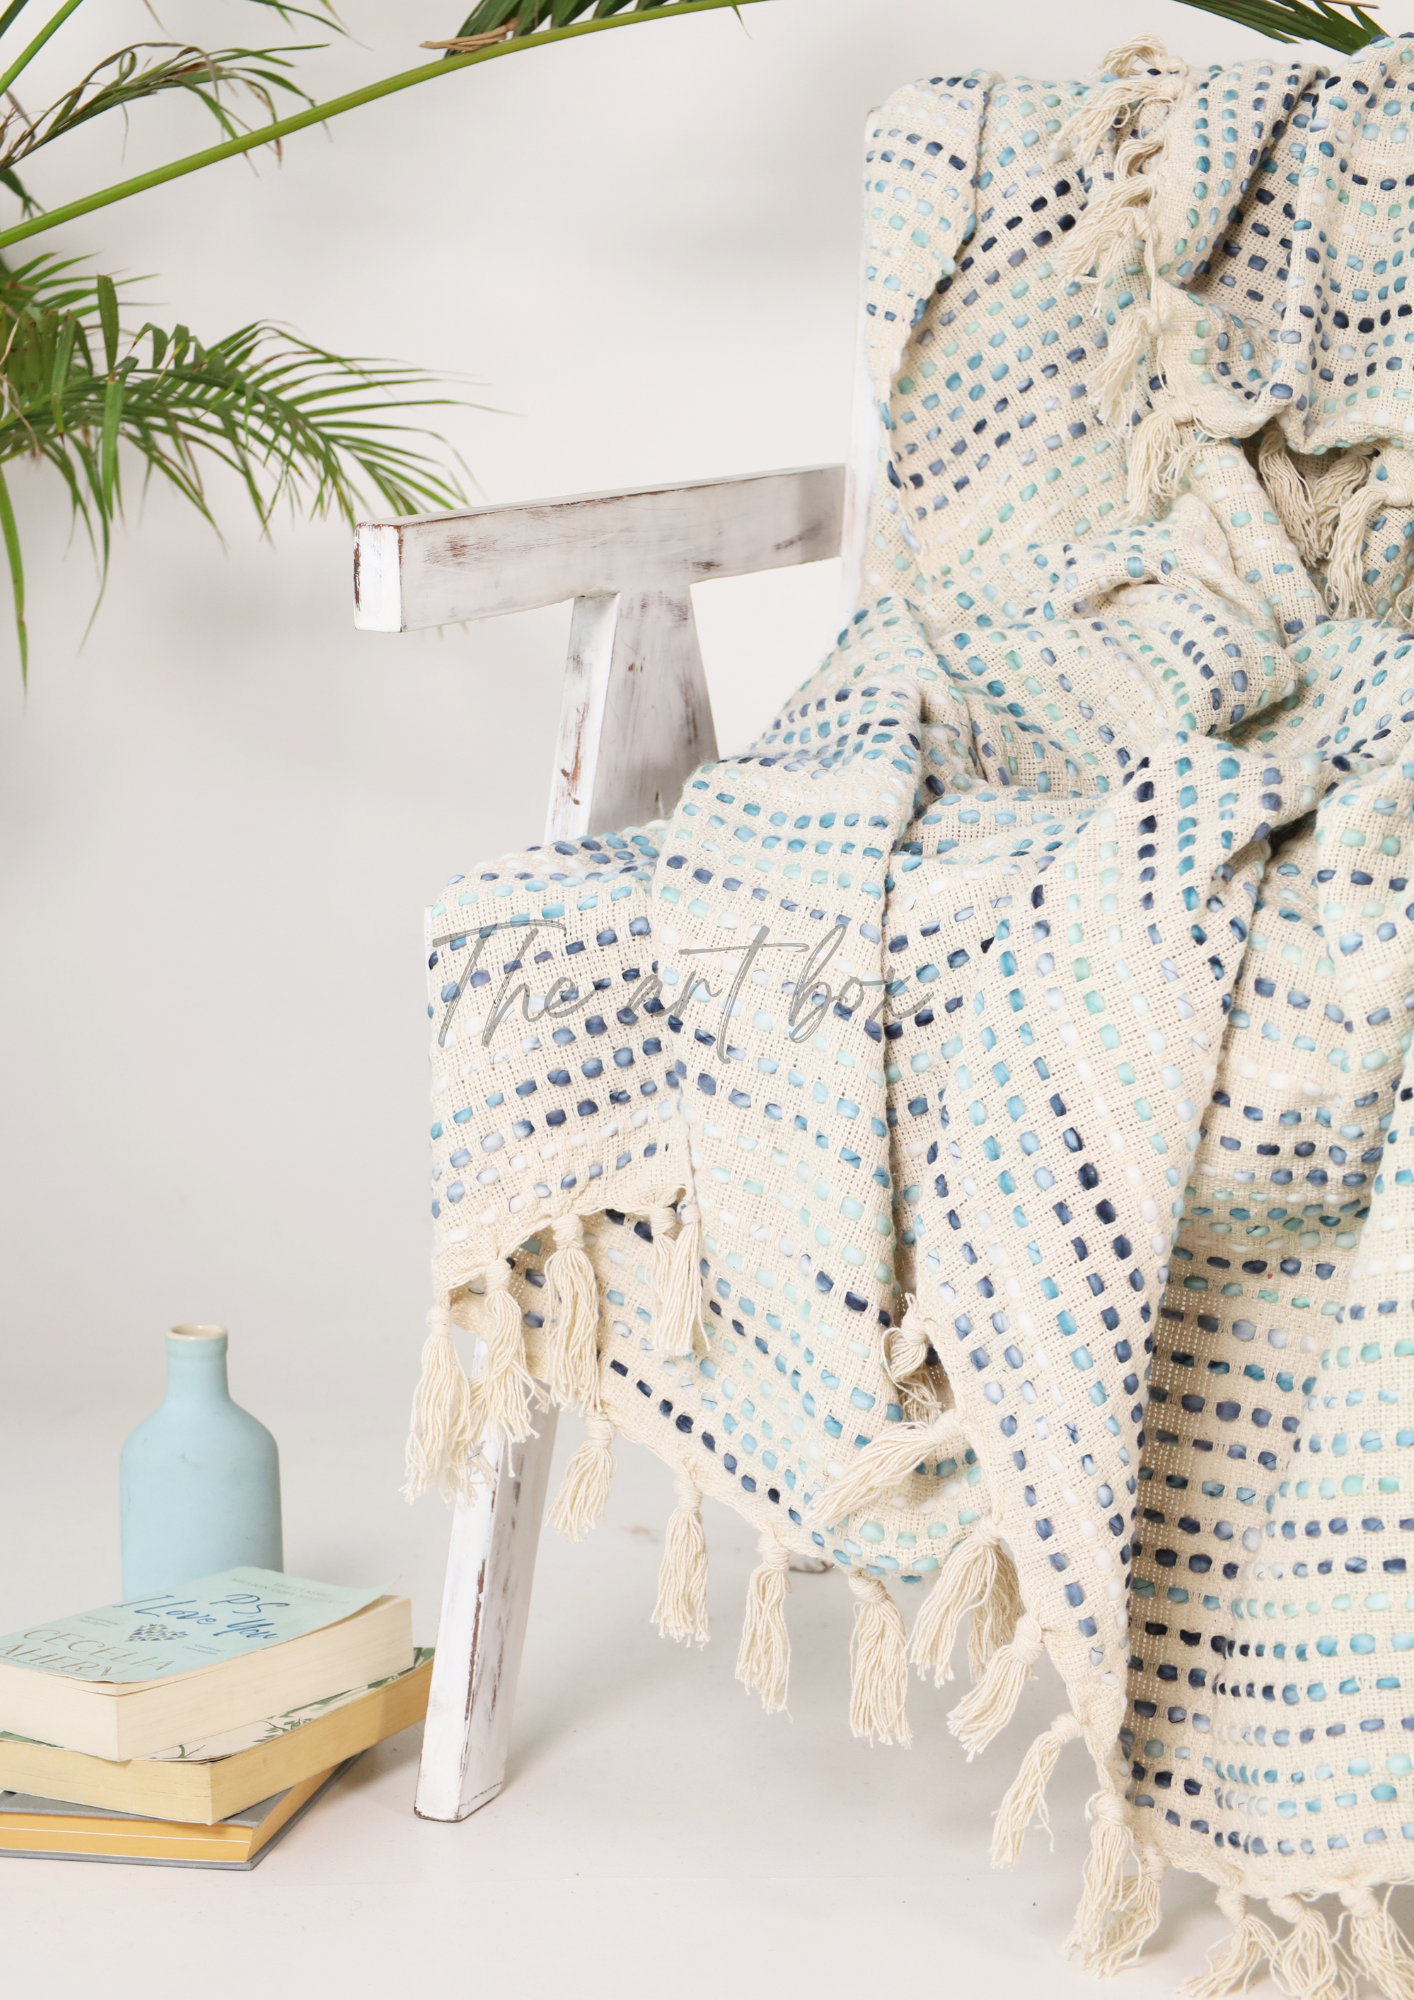 Shades of Blue Handwoven Throws